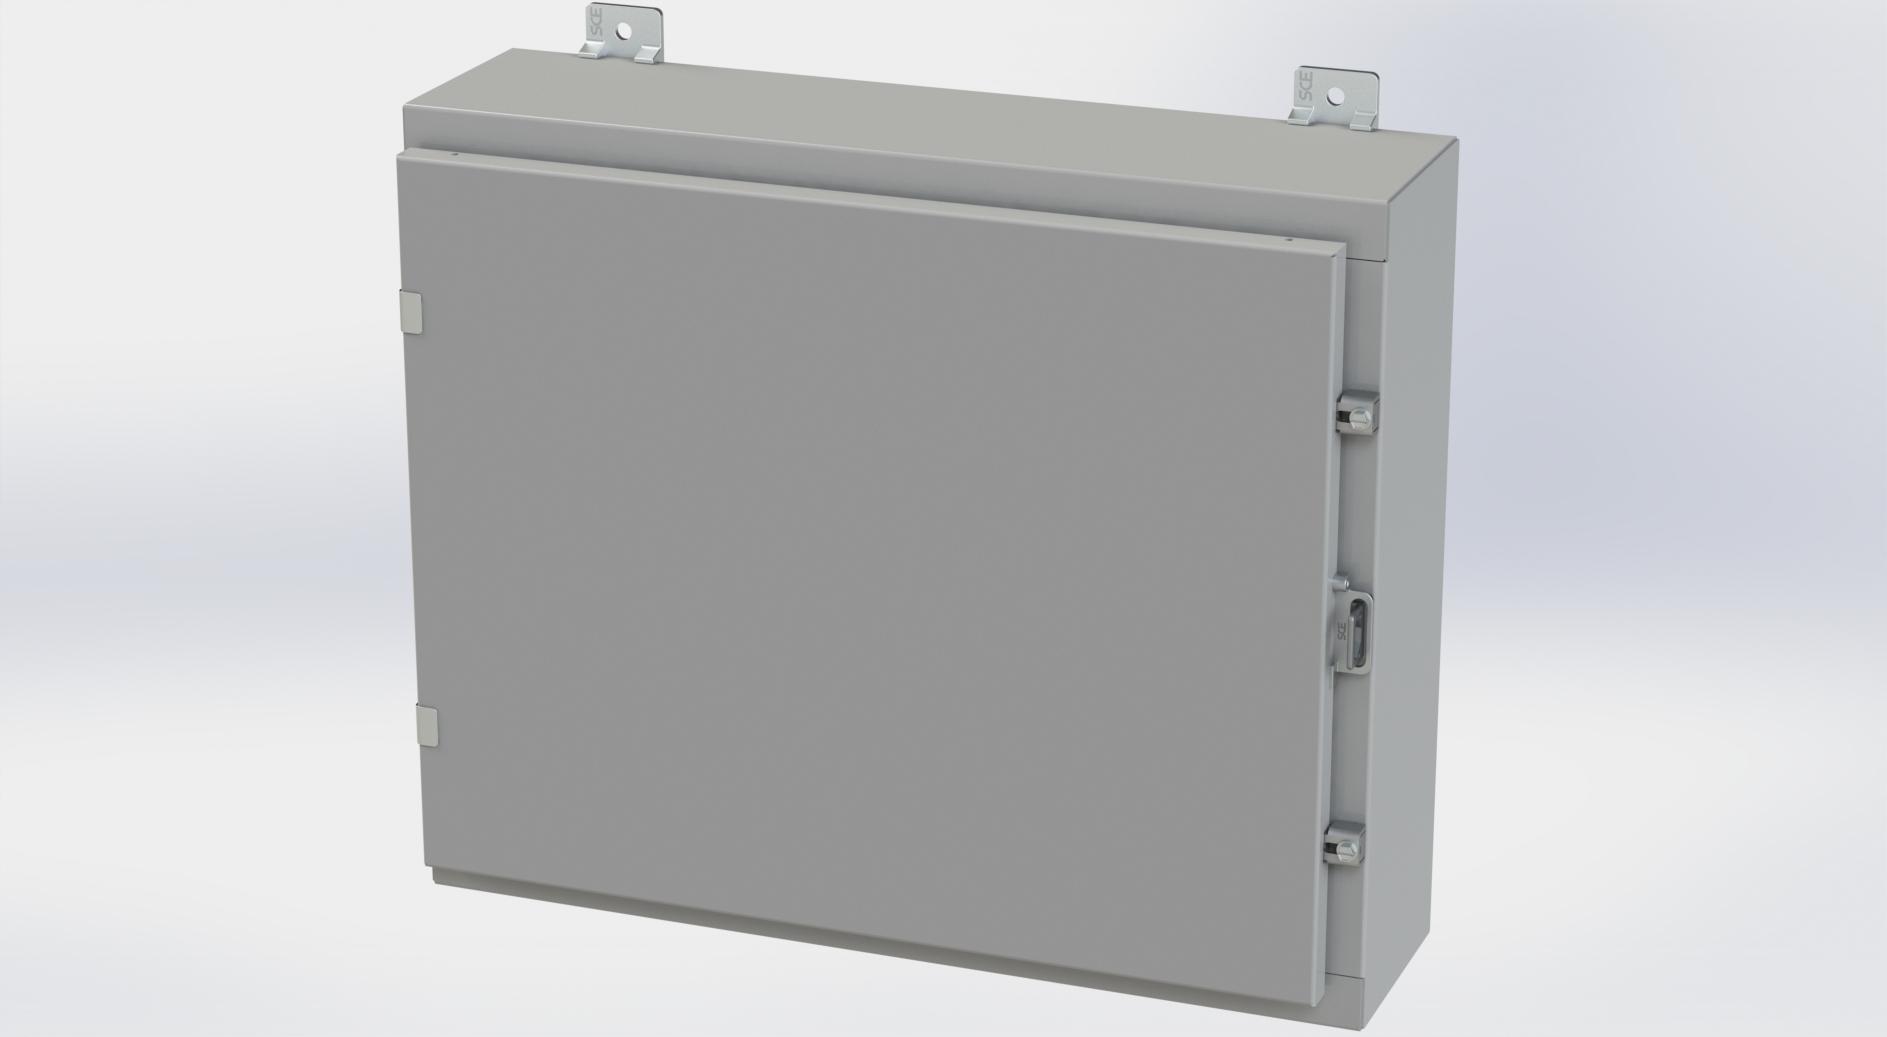 Saginaw Control SCE-20H2406LP Nema 4 LP Enclosure, Height:20.00", Width:24.00", Depth:6.00", ANSI-61 gray powder coating inside and out. Optional panels are powder coated white.